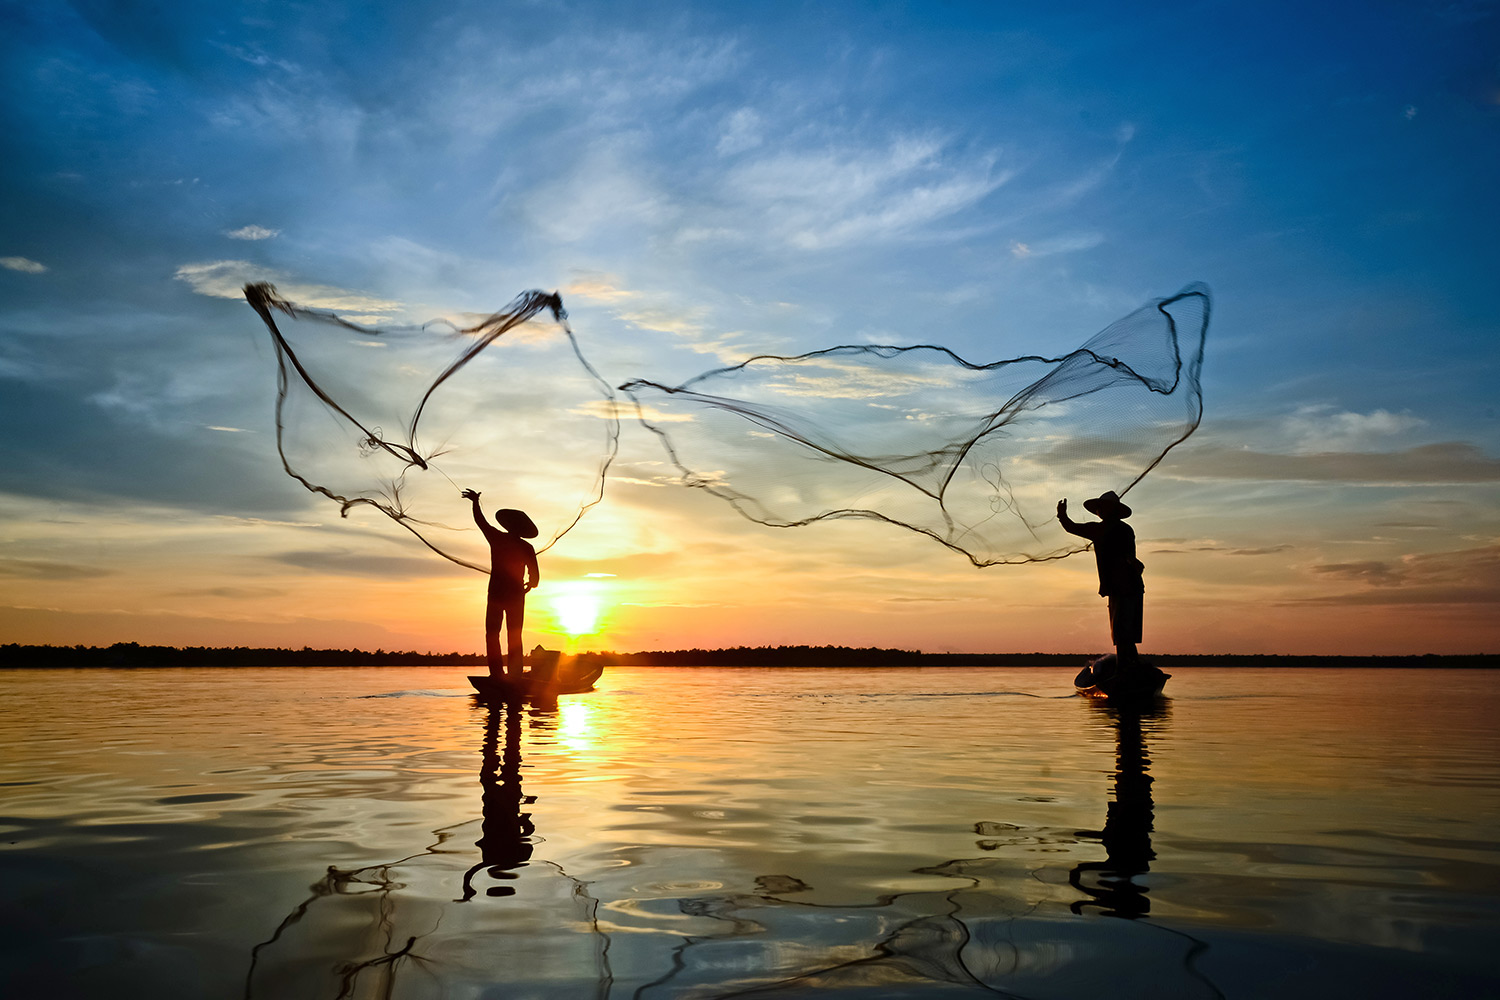 Thai fisherman strategically throwing their nets together at sunrise.